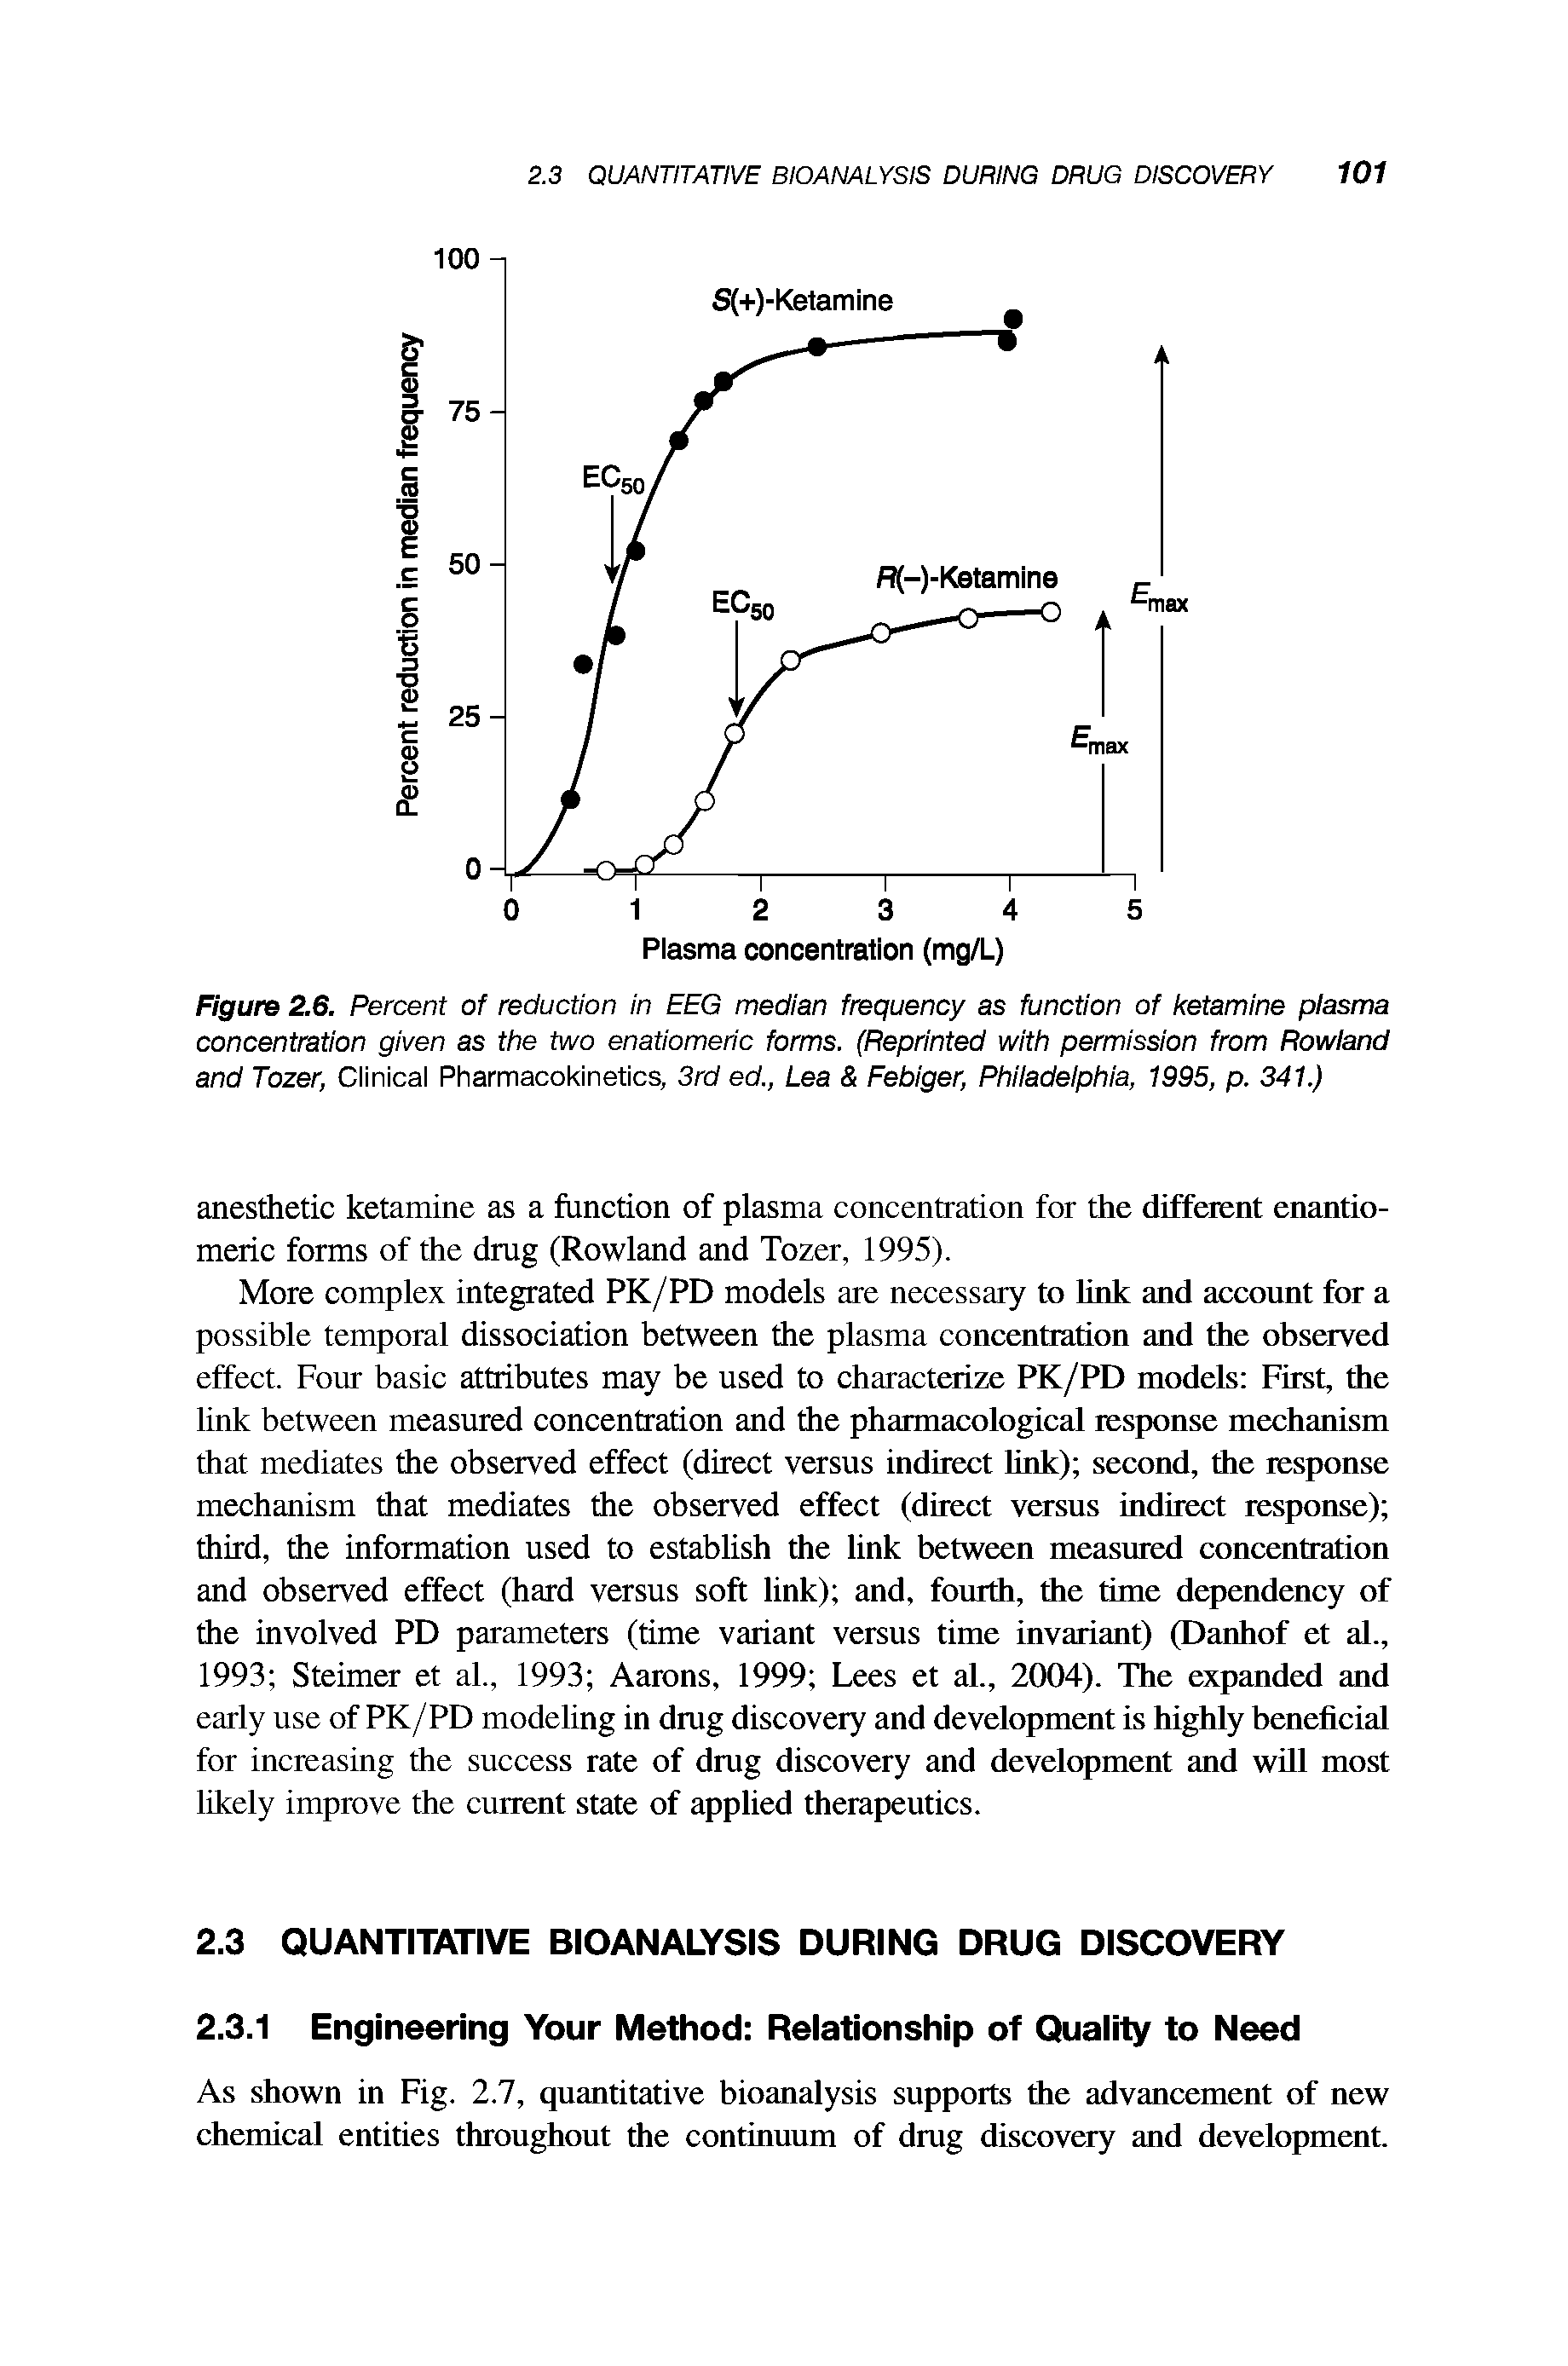 Figure 2.6. Percent of reduction in EEG median frequency as function of ketamine plasma concentration given as the two enatiomeric forms. (Reprinted with permission from Rowland and Tozer, Clinical Pharmacokinetics, 3rd ed., Lea Febiger, Philadelphia, 1995, p. 341.)...